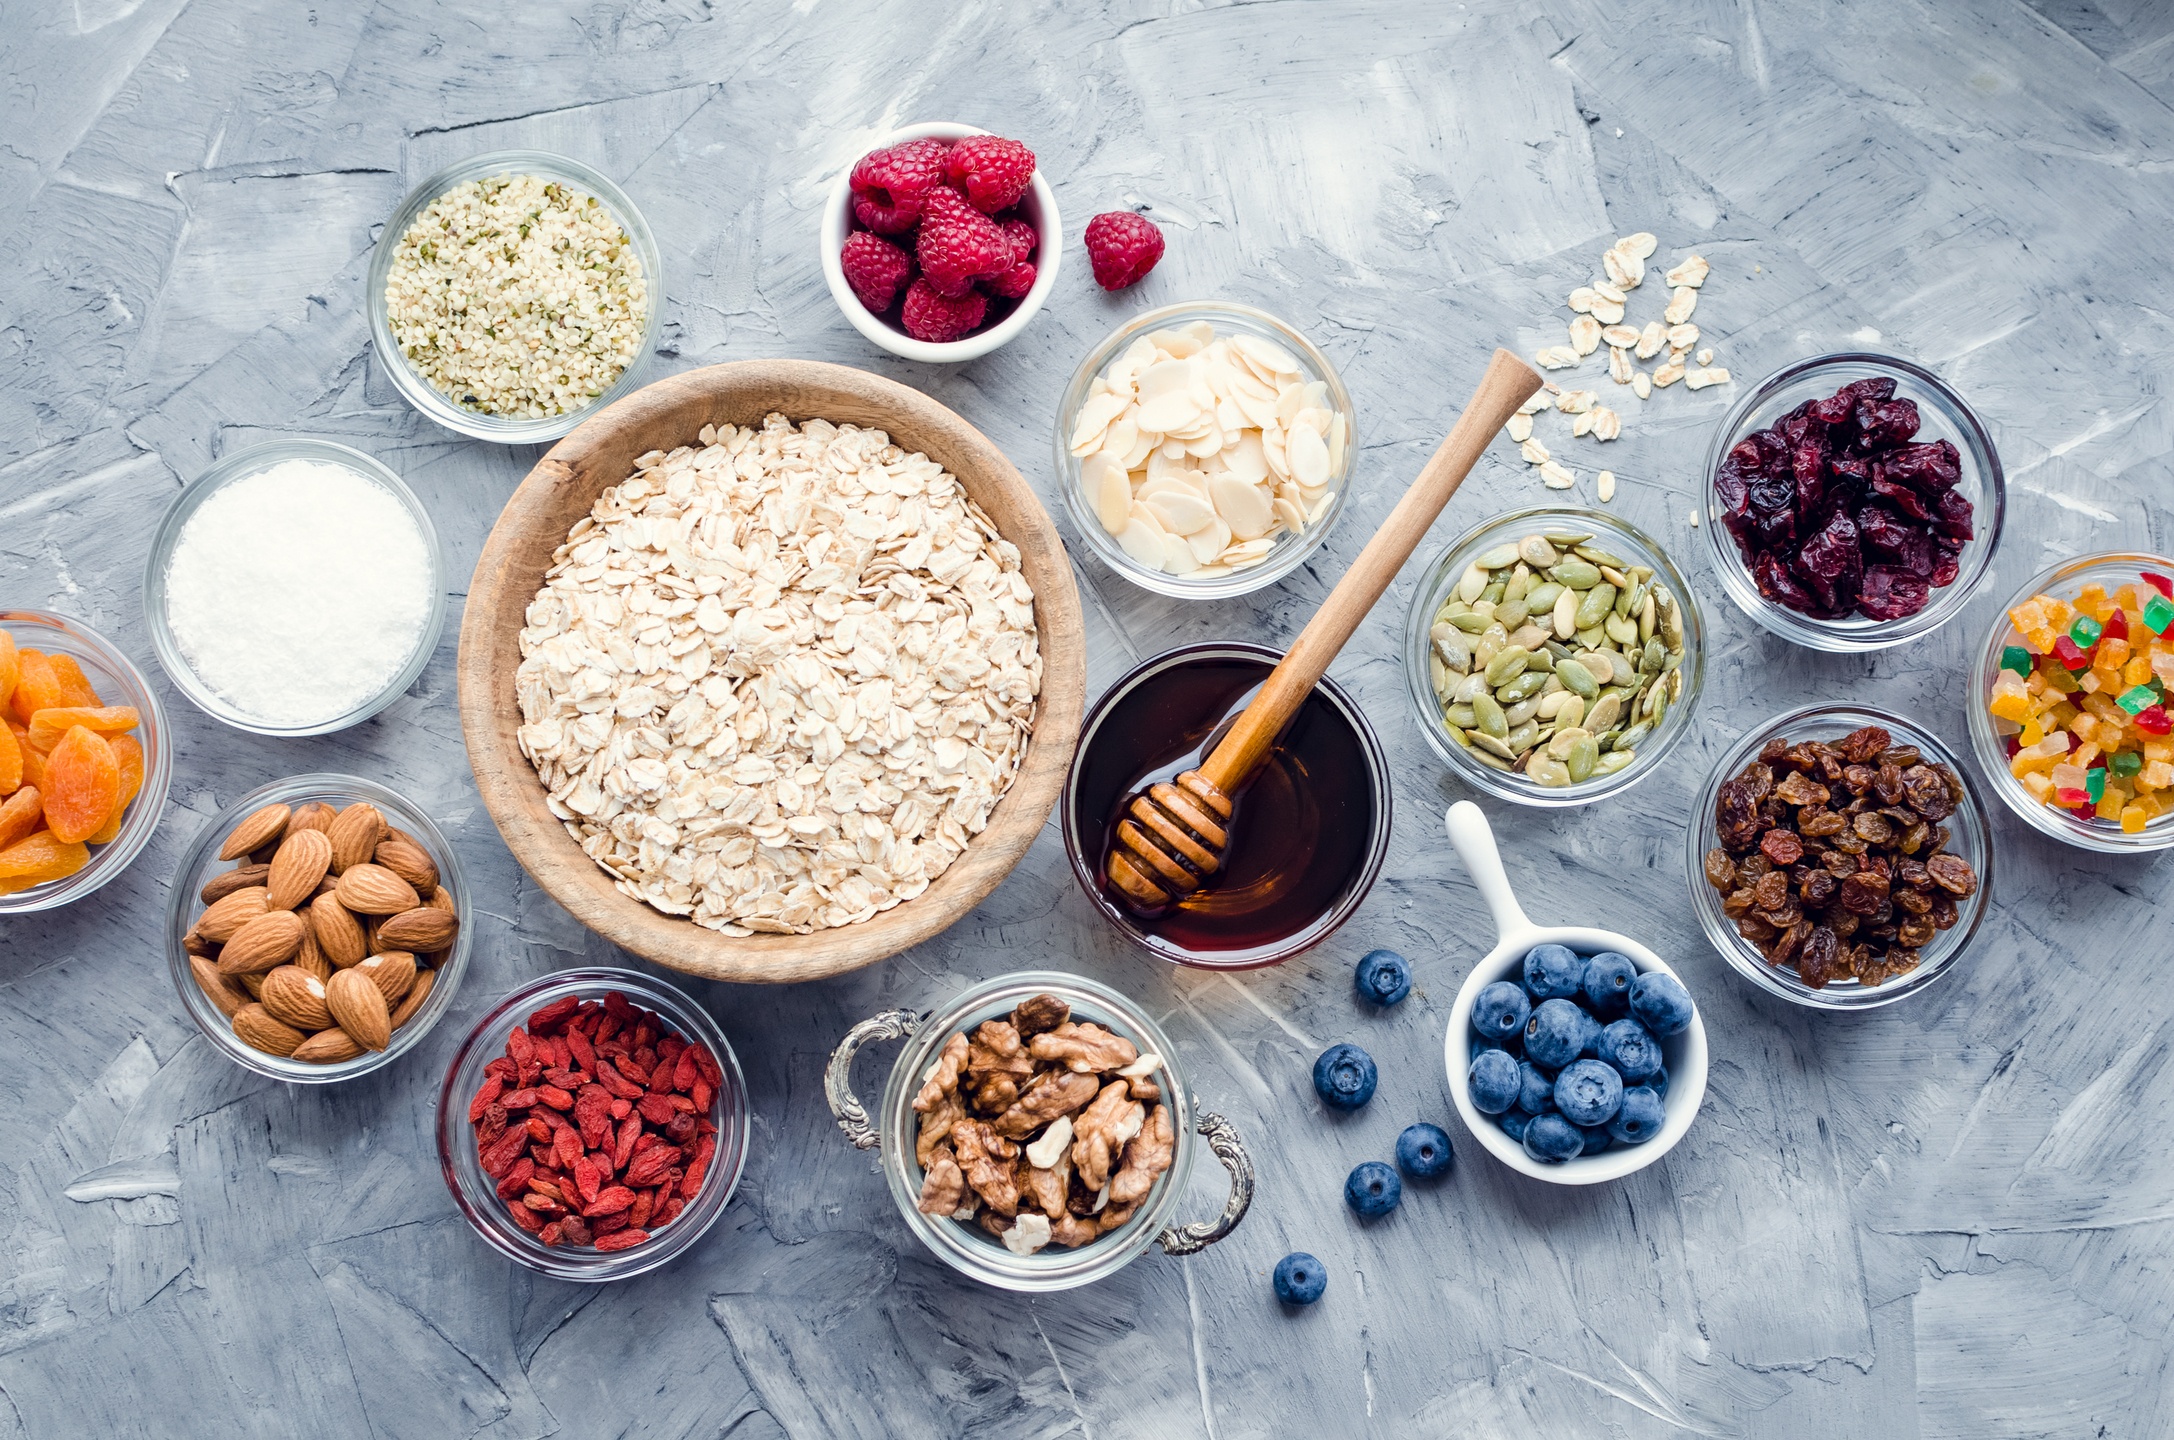 Delicious, nutritious, and easy to customize, our hemp granola recipe will be your new easy breakfast snack. Photo: Various granola ingredients in bowls including oats, hemp hearts, honey, nuts, and berries.